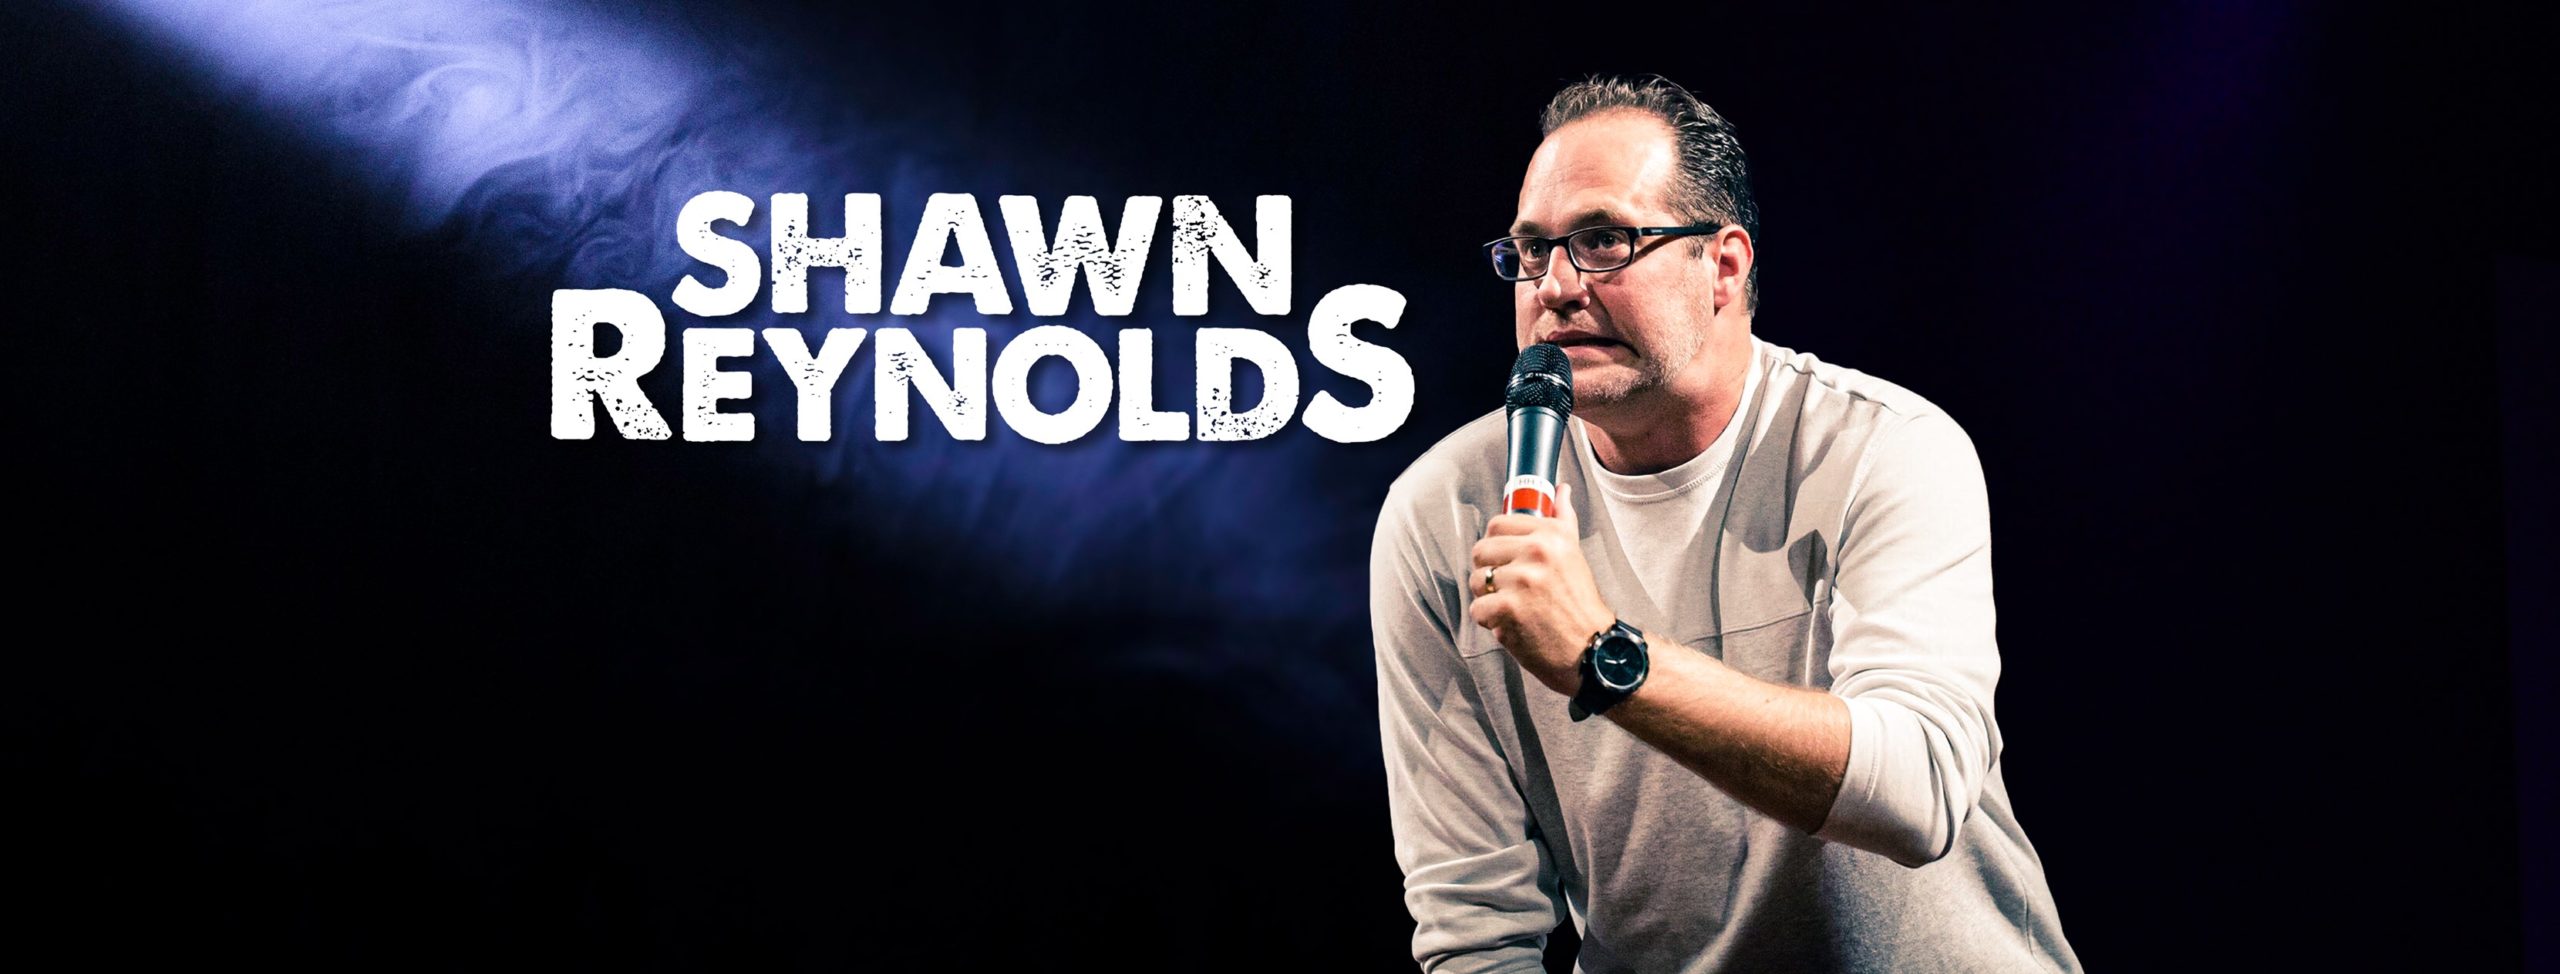 Heartbeat of Toledo’s Comedy Show with Shawn Reynolds!